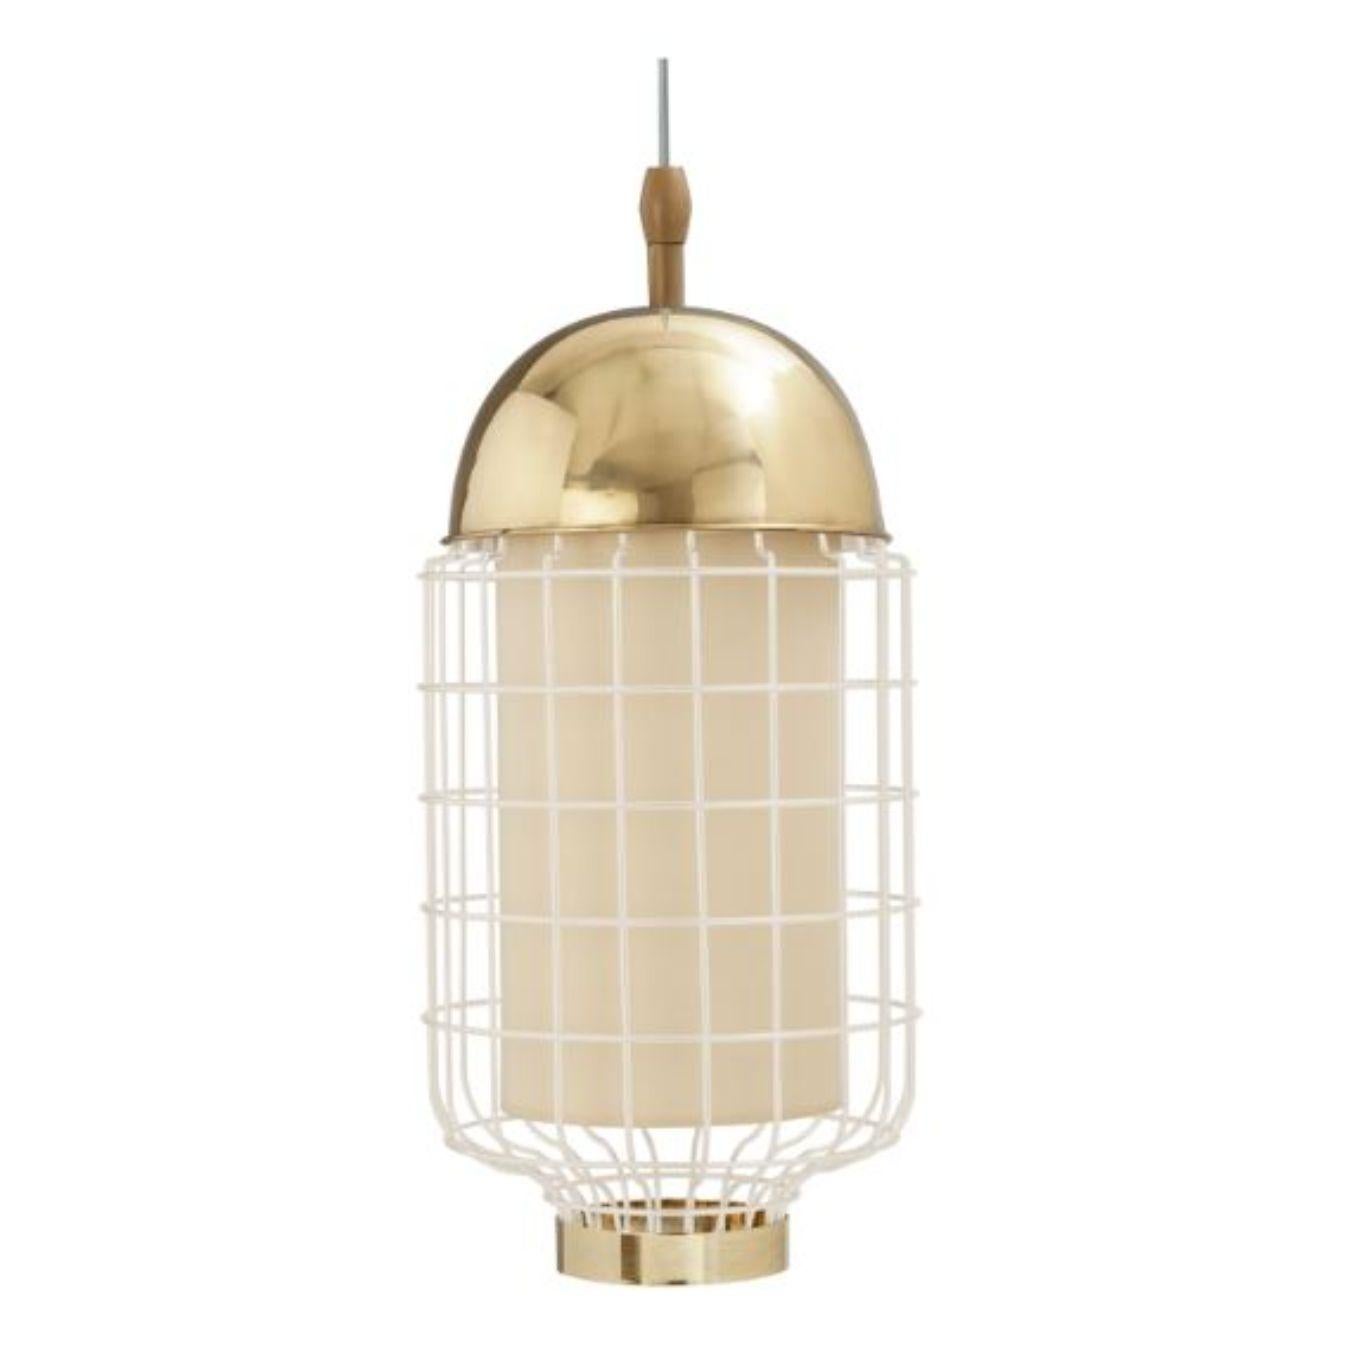 Brass Magnolia II Suspension lamp with brass ring by Dooq
Dimensions: W 27 x D 27 x H 59 cm
Materials: lacquered metal, polished or brushed metal, brass.
abat-jour: cotton
Also available in different colours and